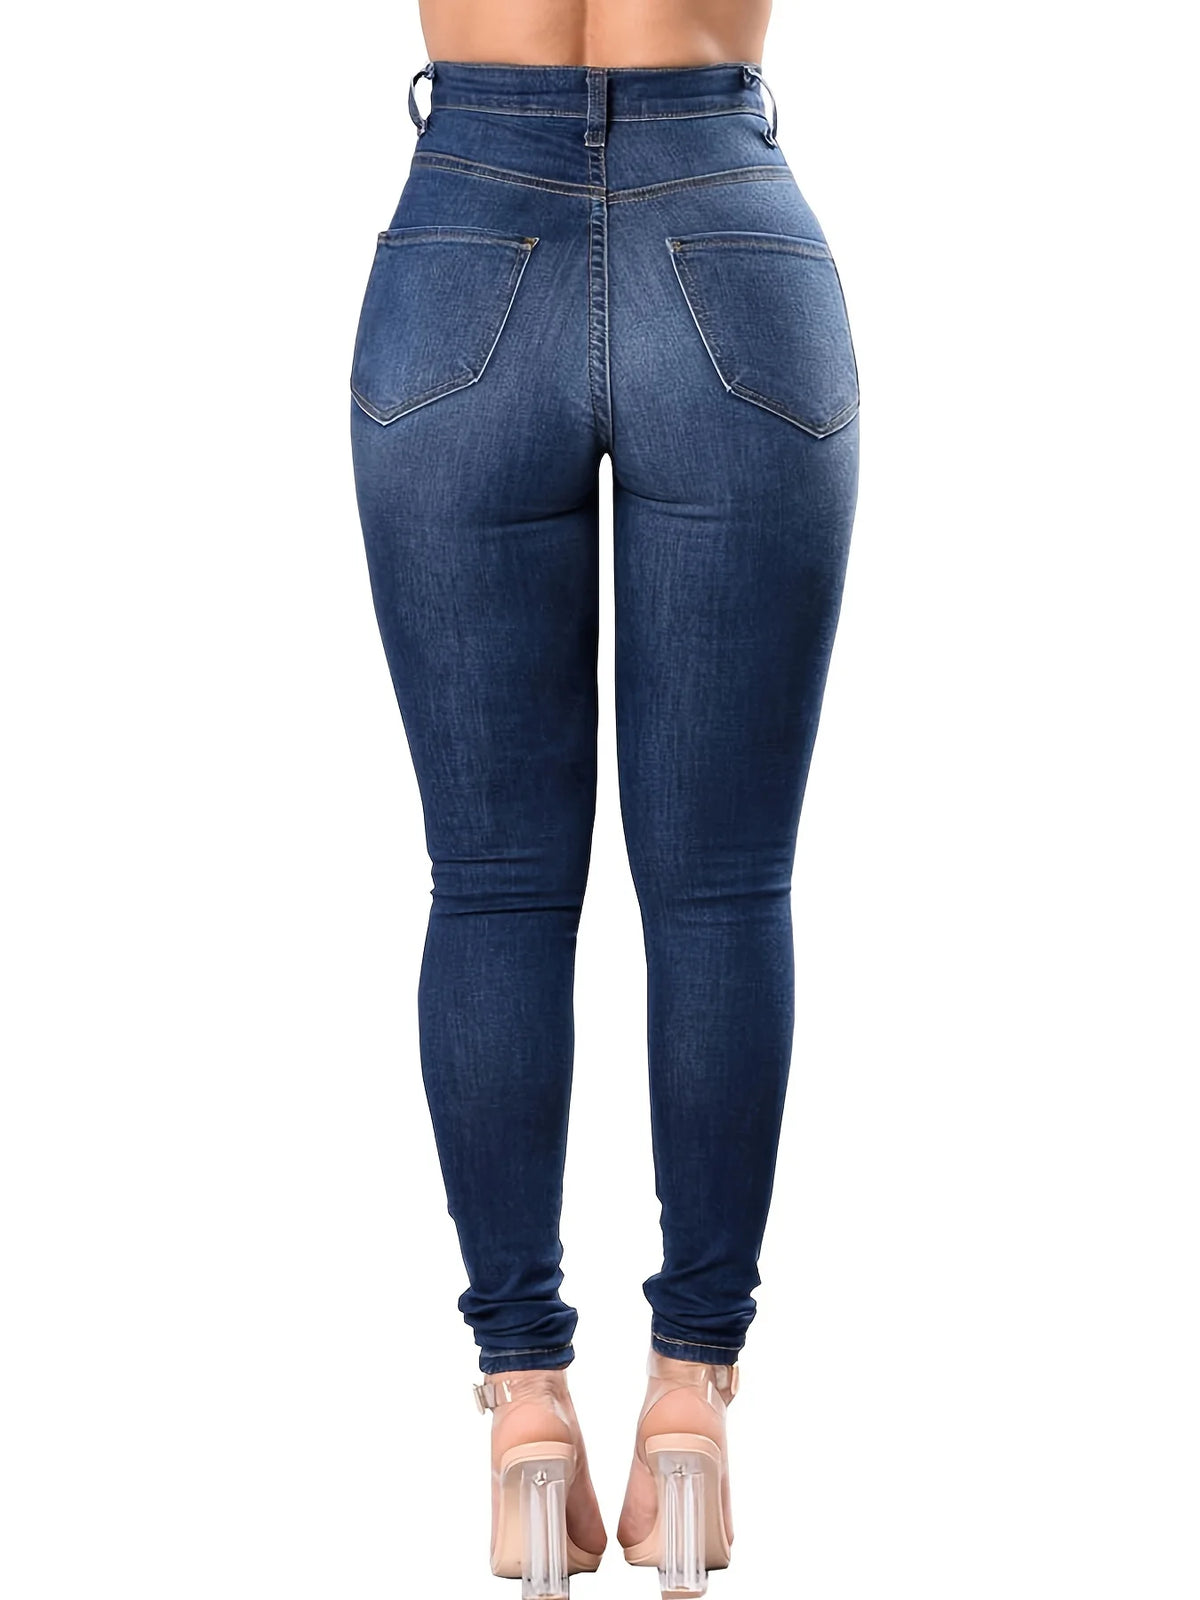 Blue Ripped Holes Skinny Jeans: Distressed High Waist Slim Fit with Slash Pockets, Women's Denim Jeans & Clothing